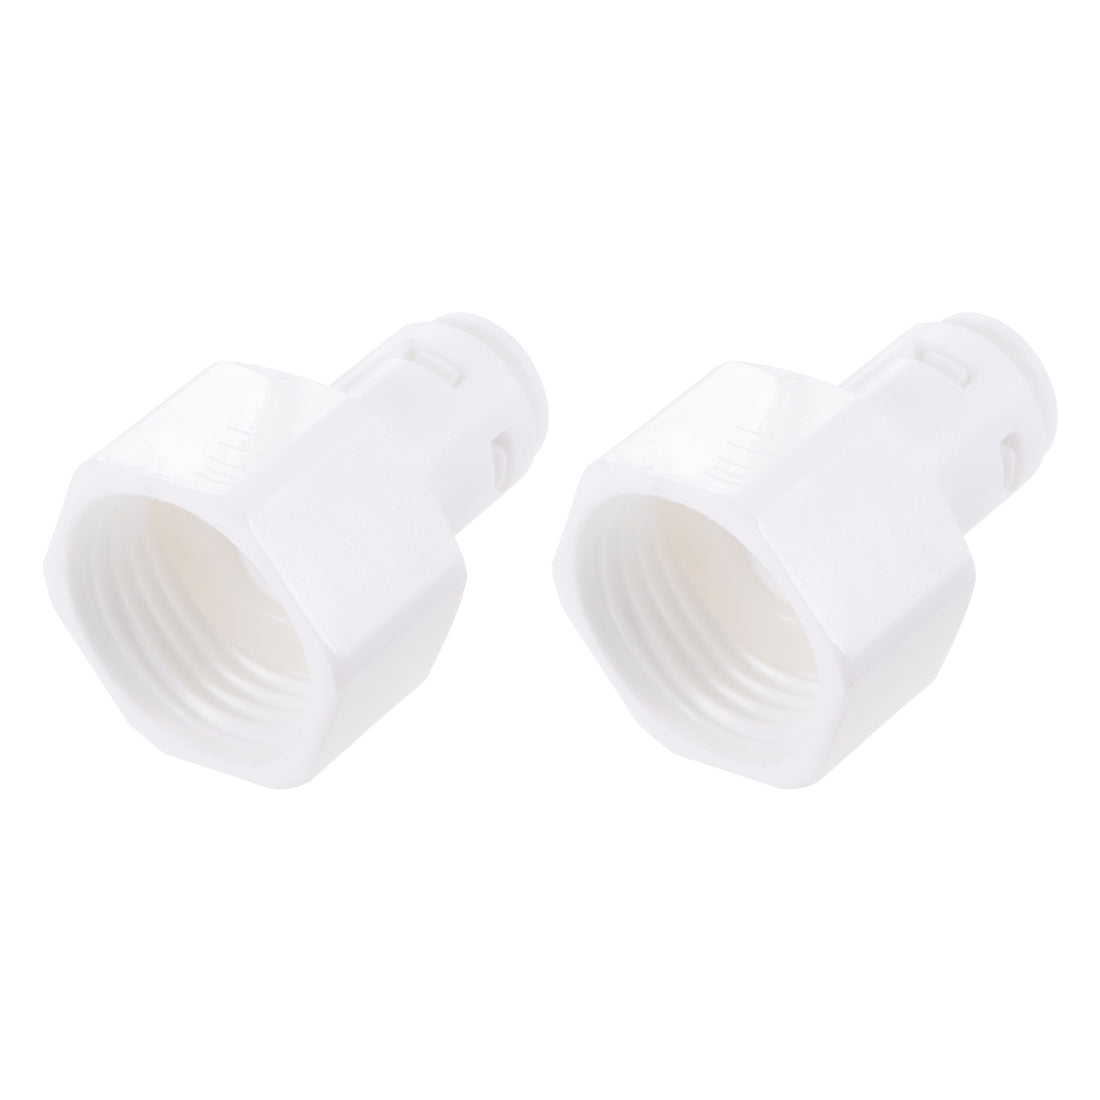 uxcell Uxcell Quick Connector G1/2 Female Thread to 1/4" Tube, Straight Connect Fittings for Water Purifier, 34mm White 2Pcs